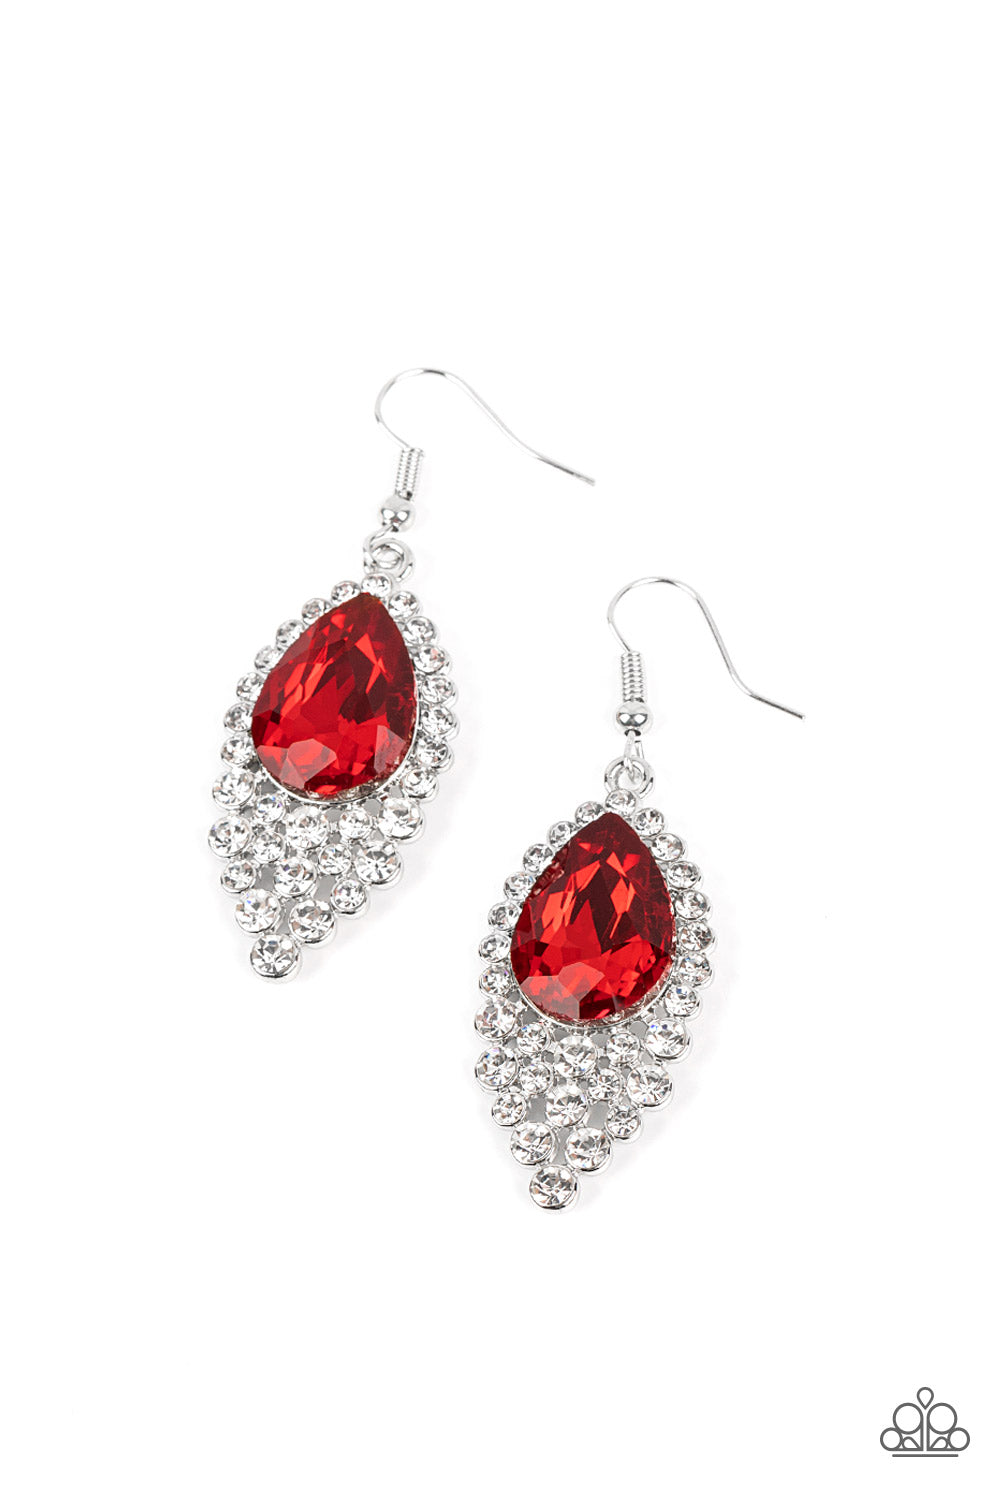 five-dollar-jewelry-glorious-glimmer-red-paparazzi-accessories